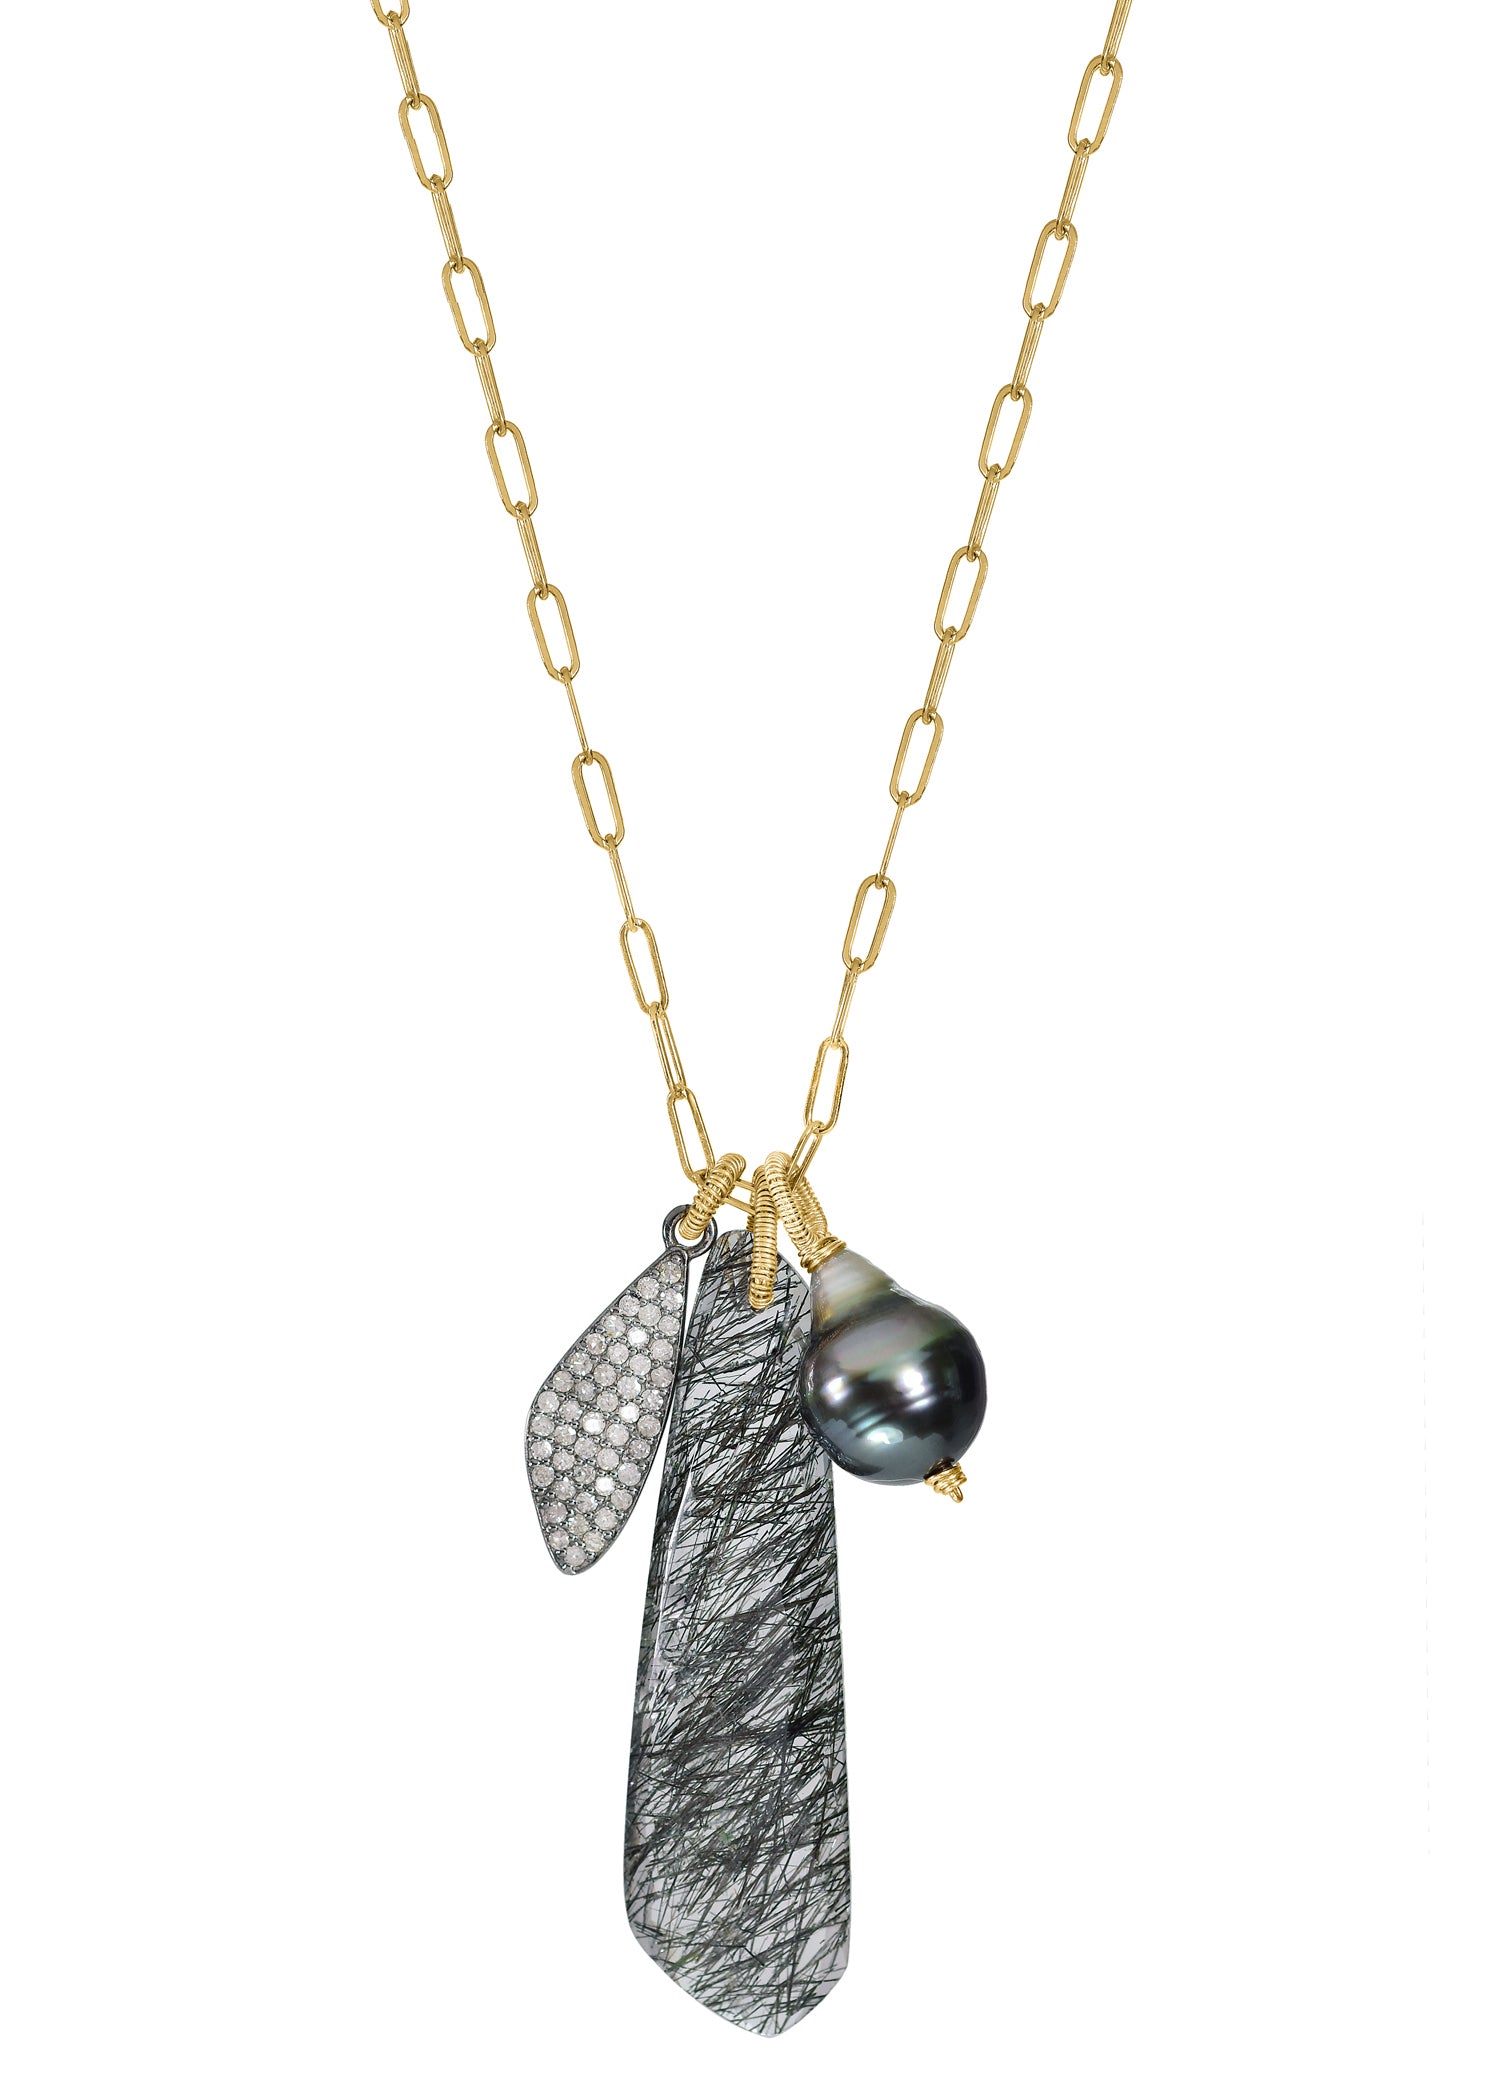 Diamond Black tourmalated quartz Tahitian pearl 14k gold Necklace measures 32" in length Pendants measure 3/4" in length and 1/4" in width(pave), 1 5/8" in length and 1/2" in width (quartz), and 1/2" in length and  3/8" in width (pearl) Handmade in our Los Angeles studio